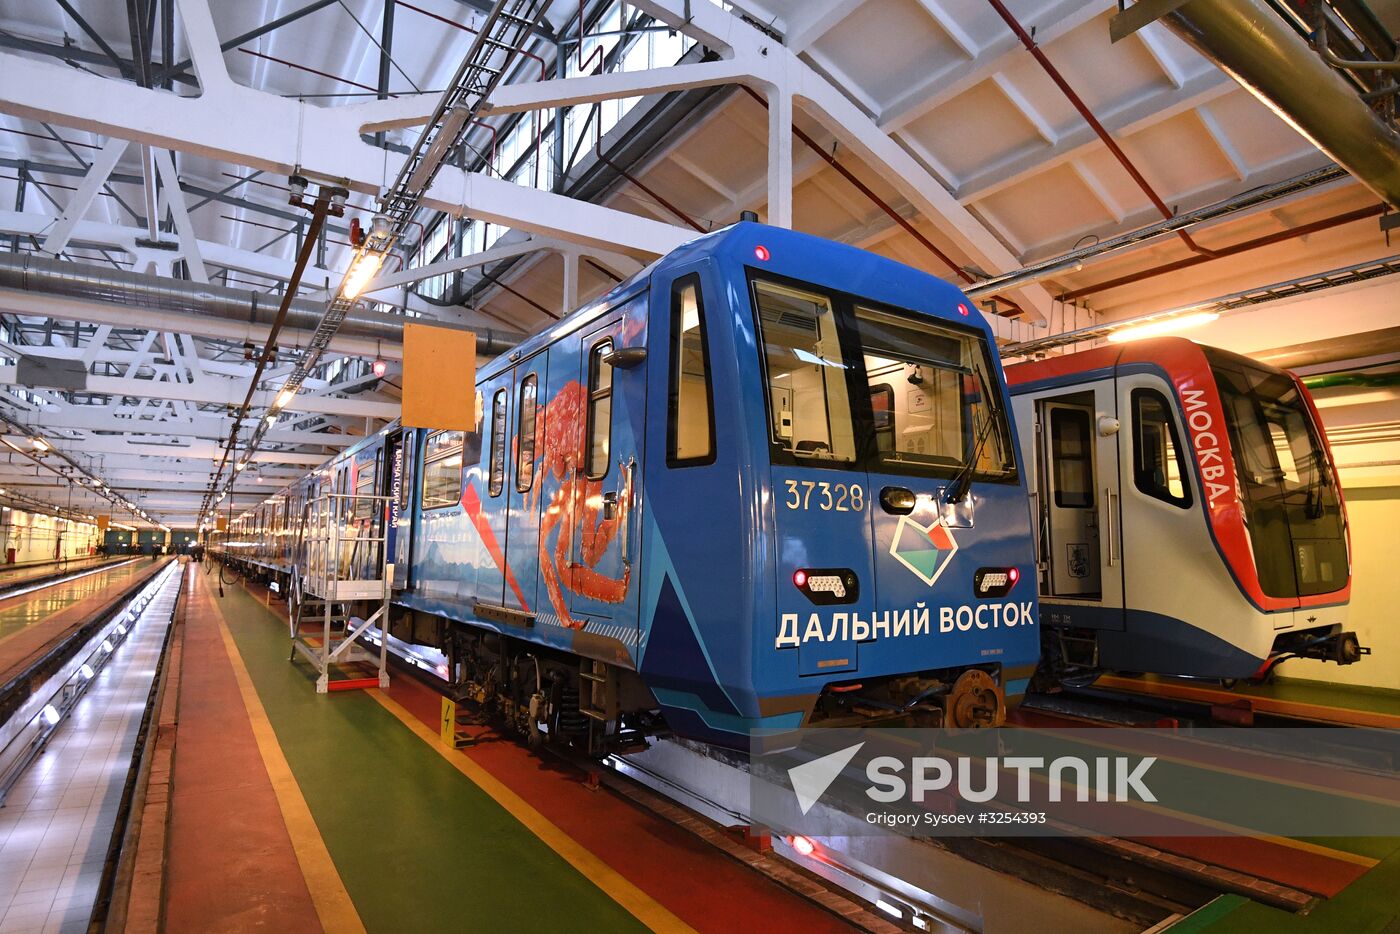 Far Eastern Express themed train launched